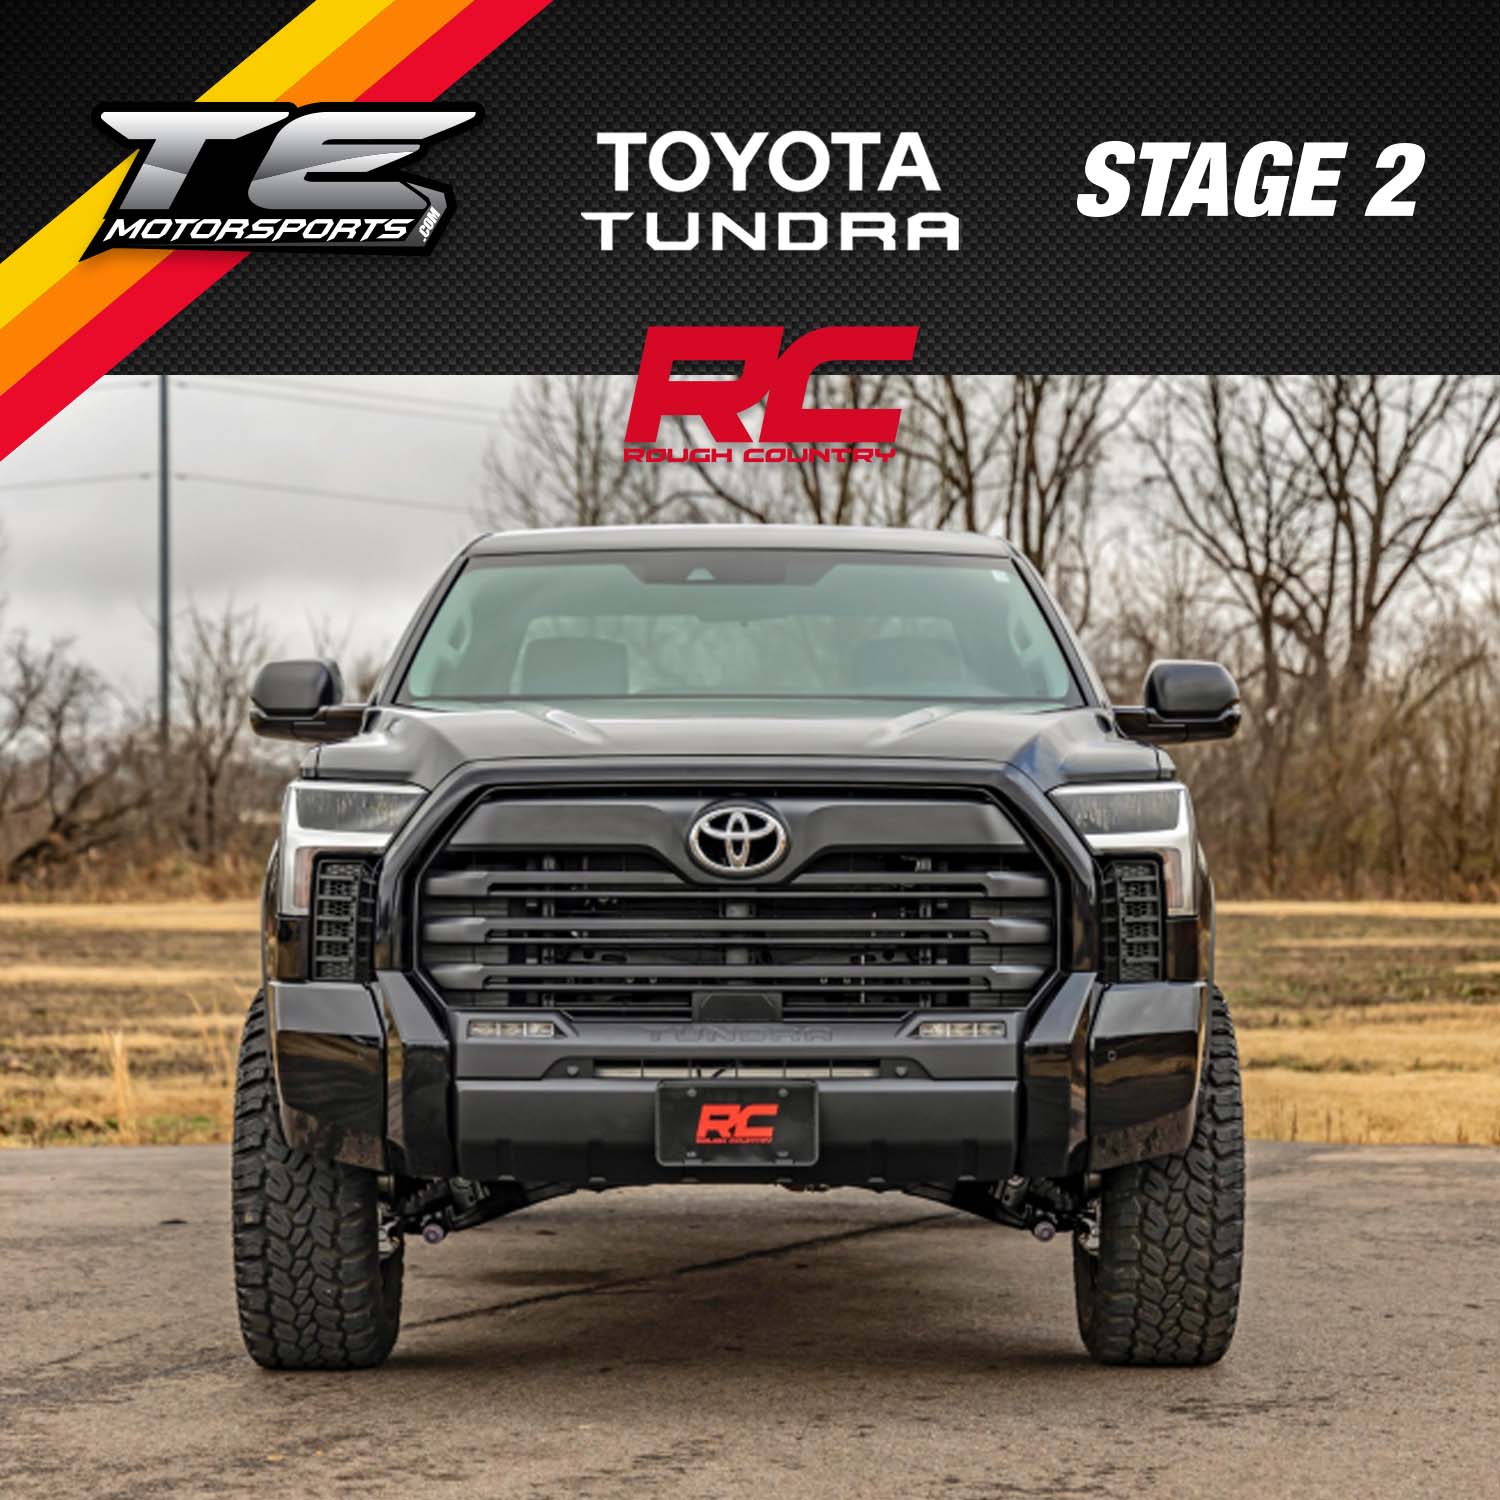 Rough country 3.5 INCH LIFT KIT TOYOTA TUNDRA 4WD (2022)